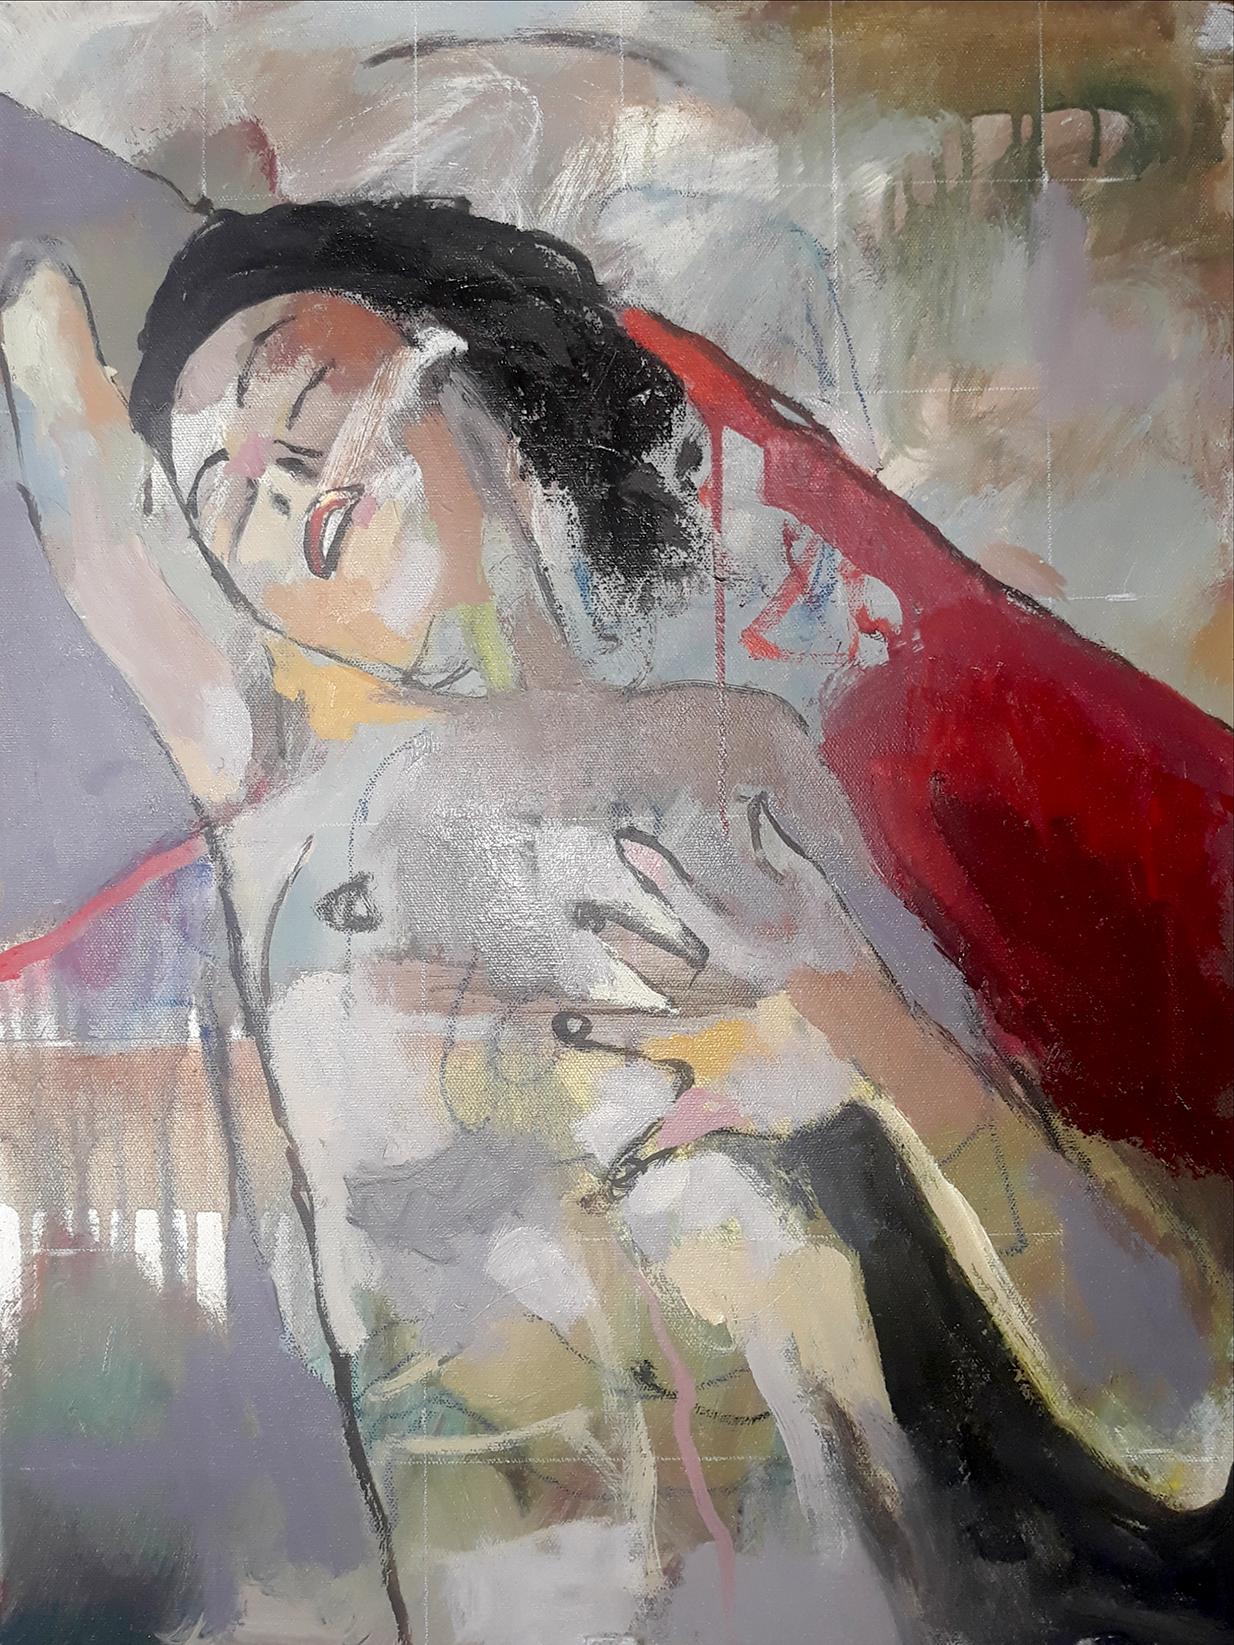 Tom Bennett Figurative Painting - Nothing Lasts, dreamy female figure painting